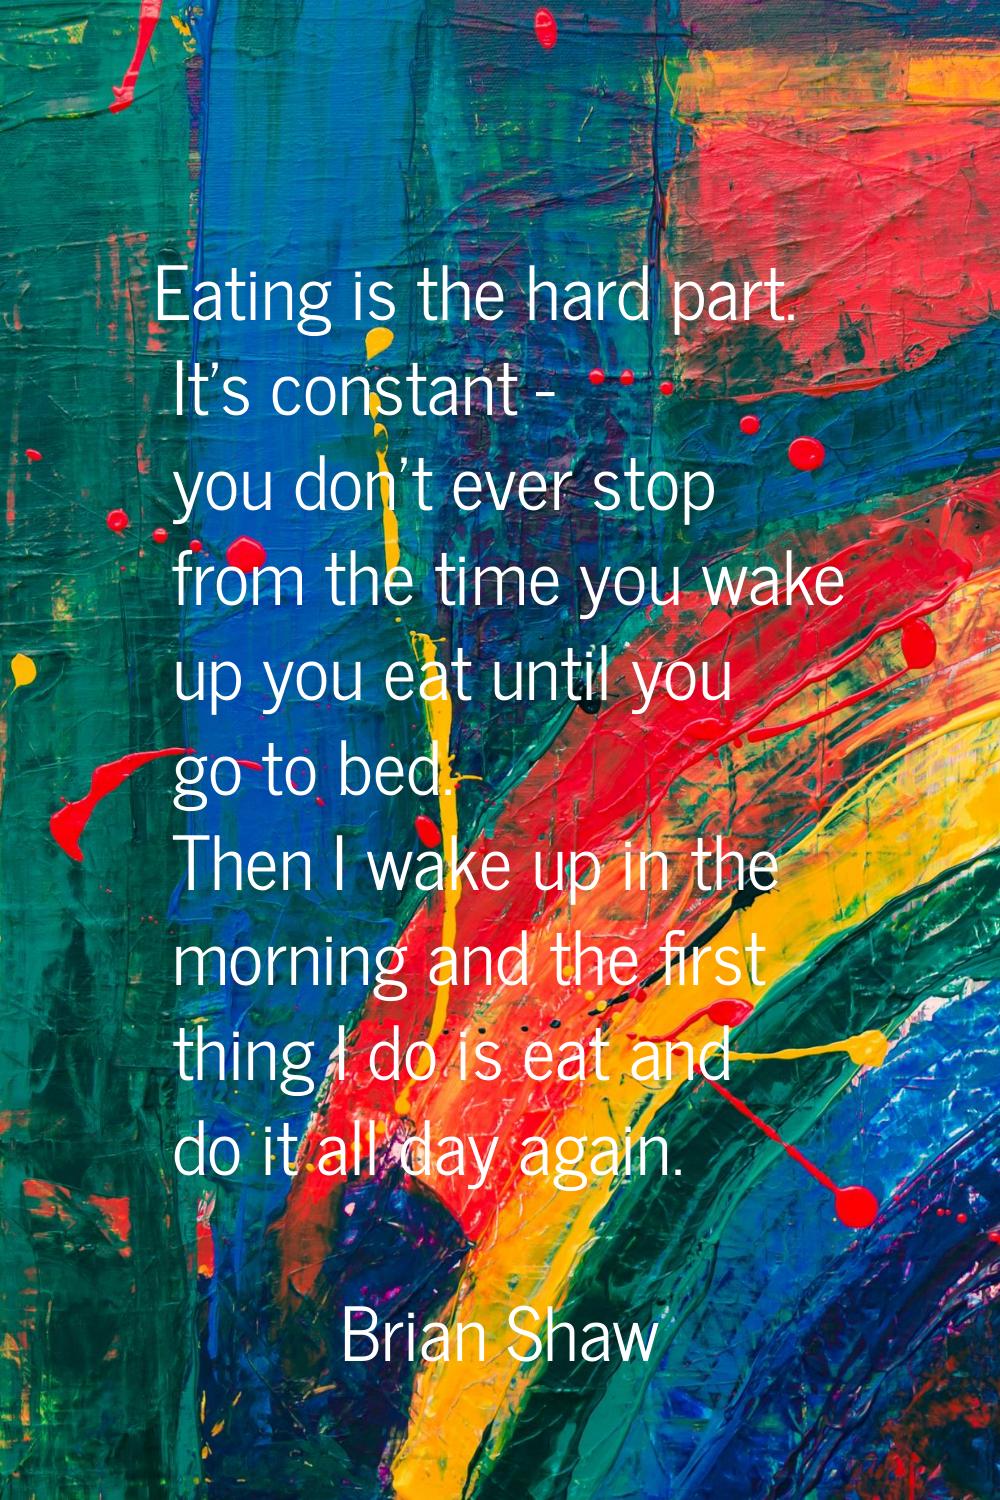 Eating is the hard part. It's constant - you don't ever stop from the time you wake up you eat unti